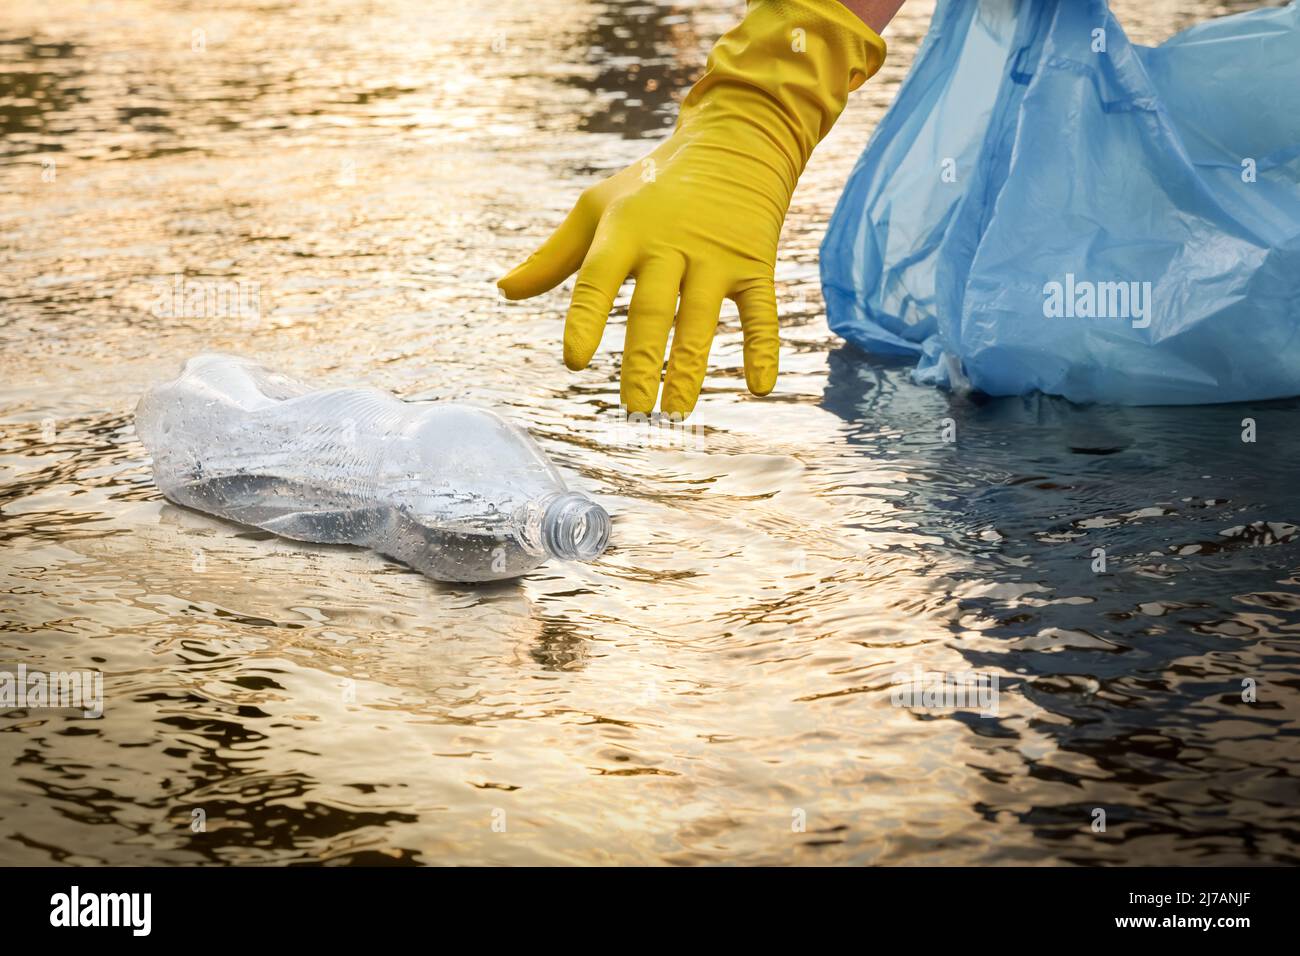 Collect garbage beach. Cleaning trash beach waste plastic PET bottle plastic pollution. Volunteer cleaning river trash pick up litter picking. Picking Stock Photo